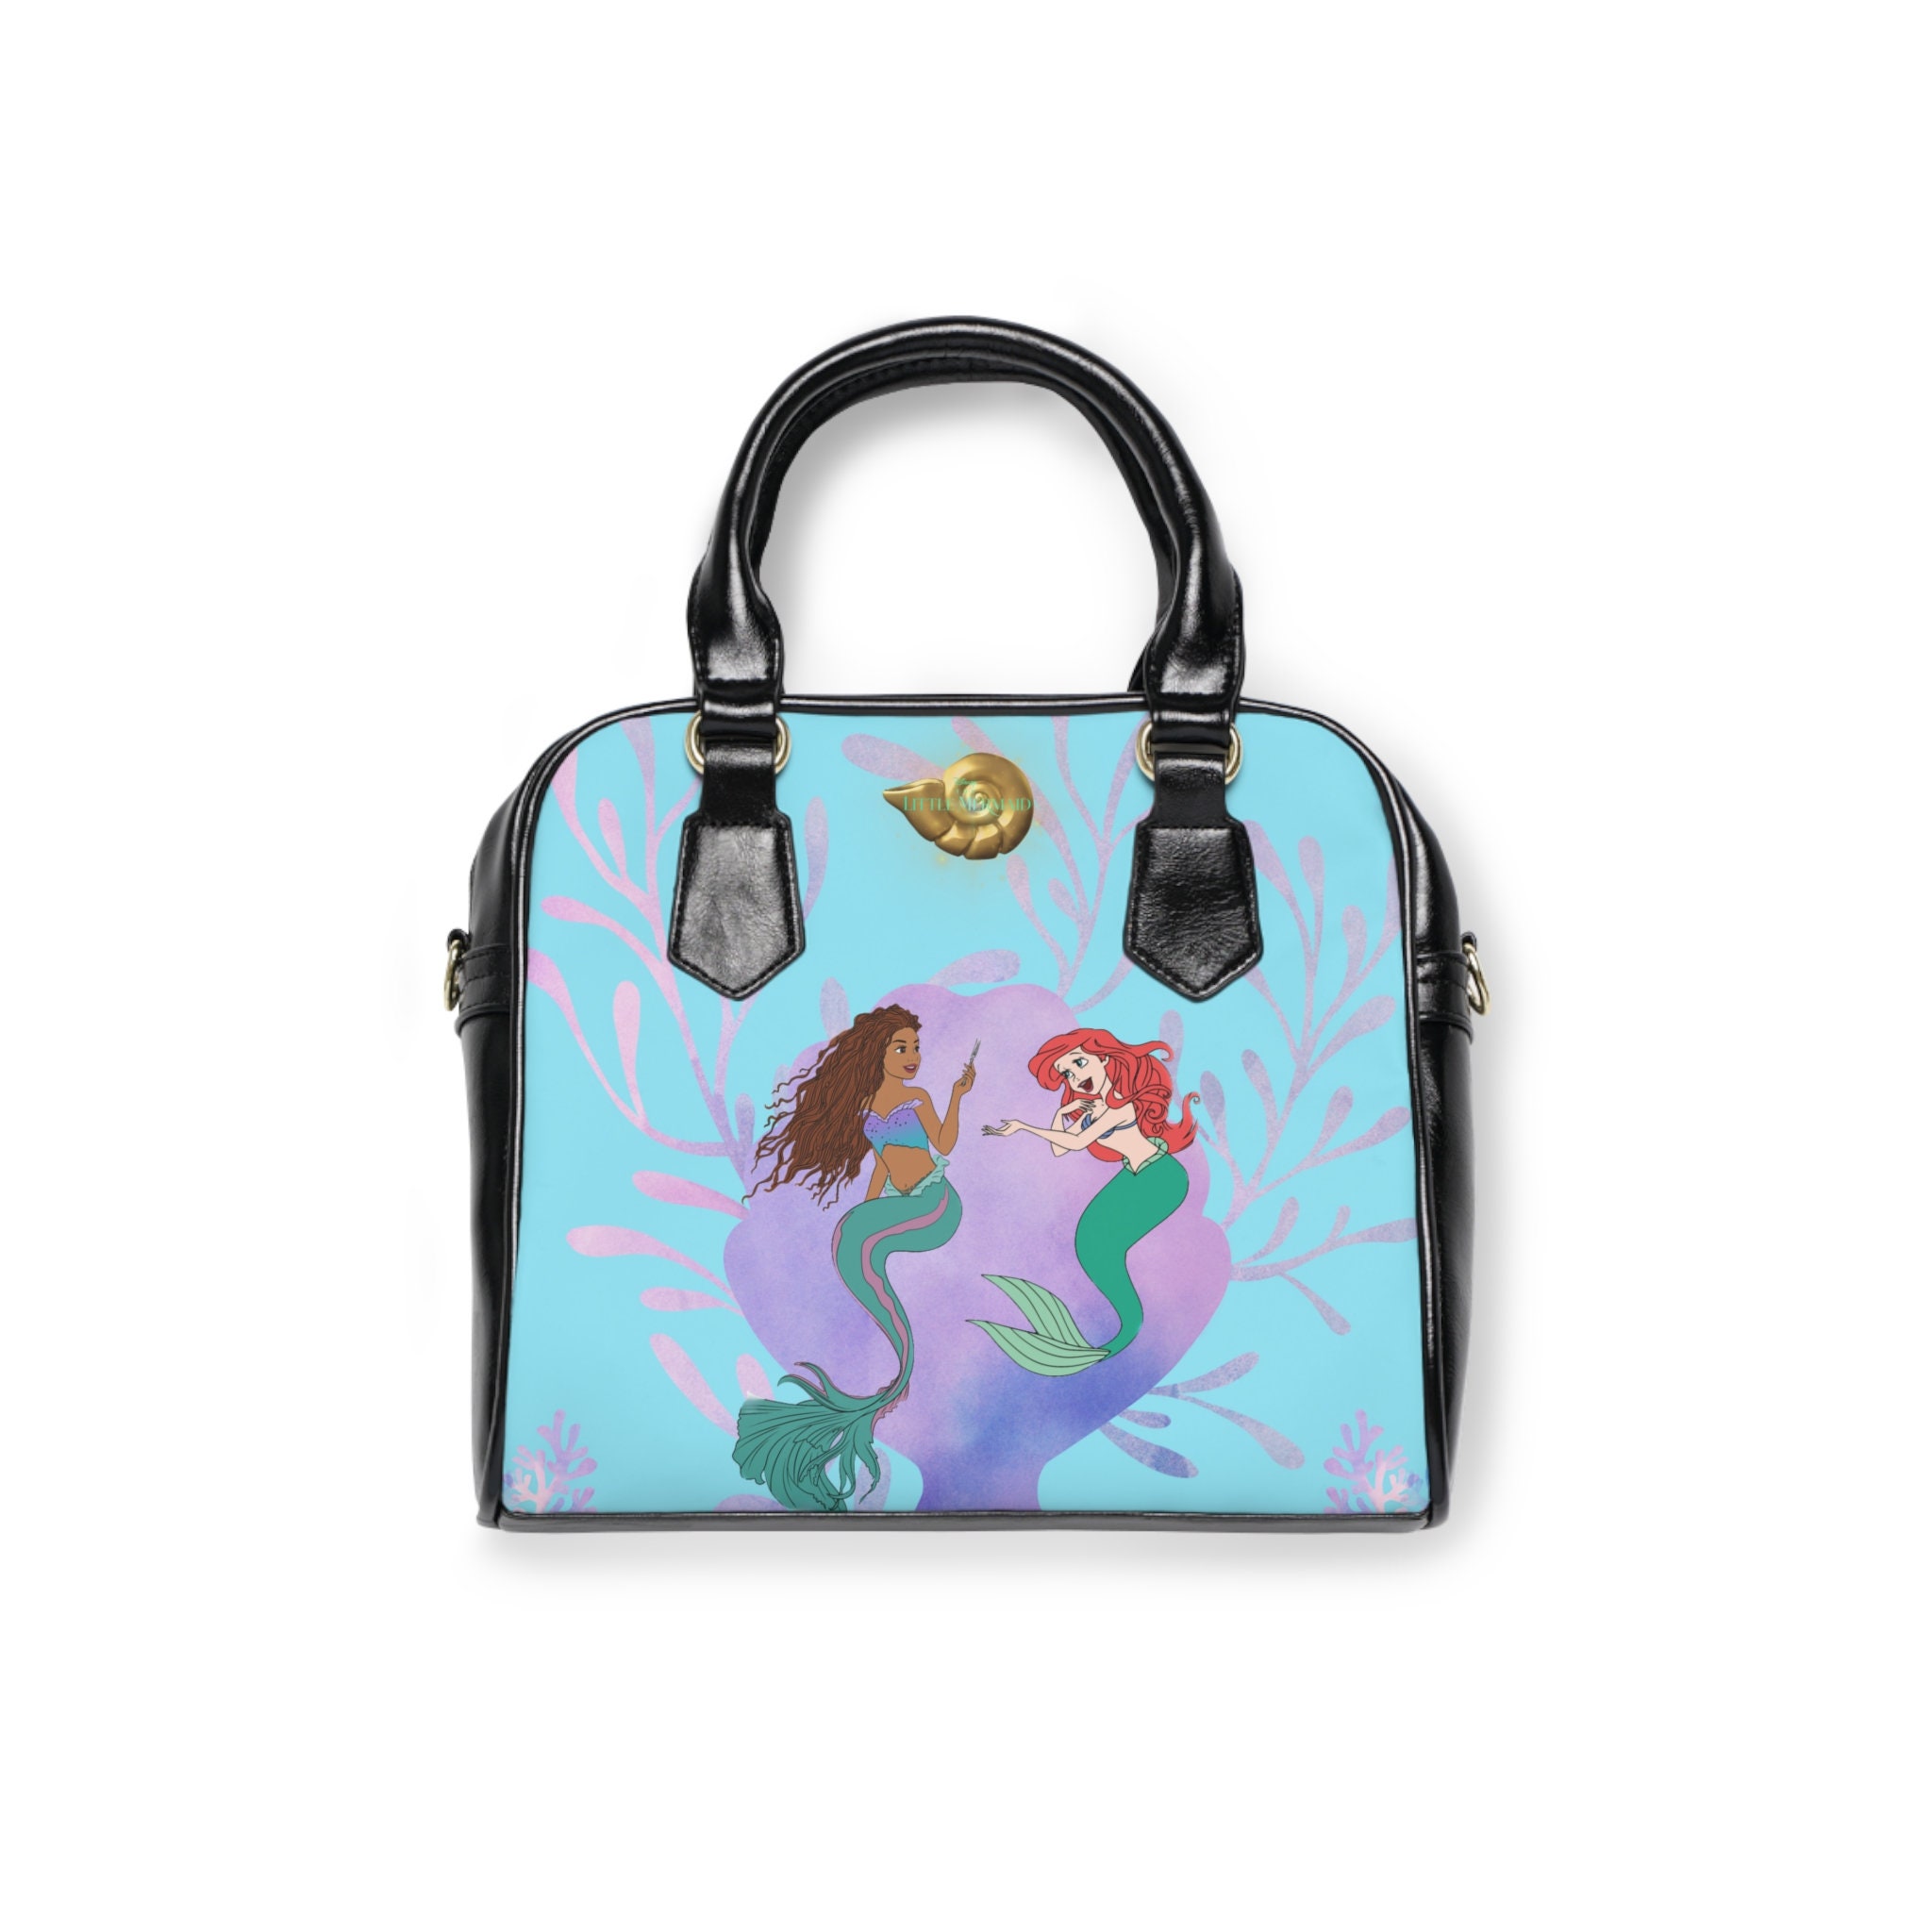 Loungefly The Little Mermaid Bowler Bag With Bag Protector | eBay